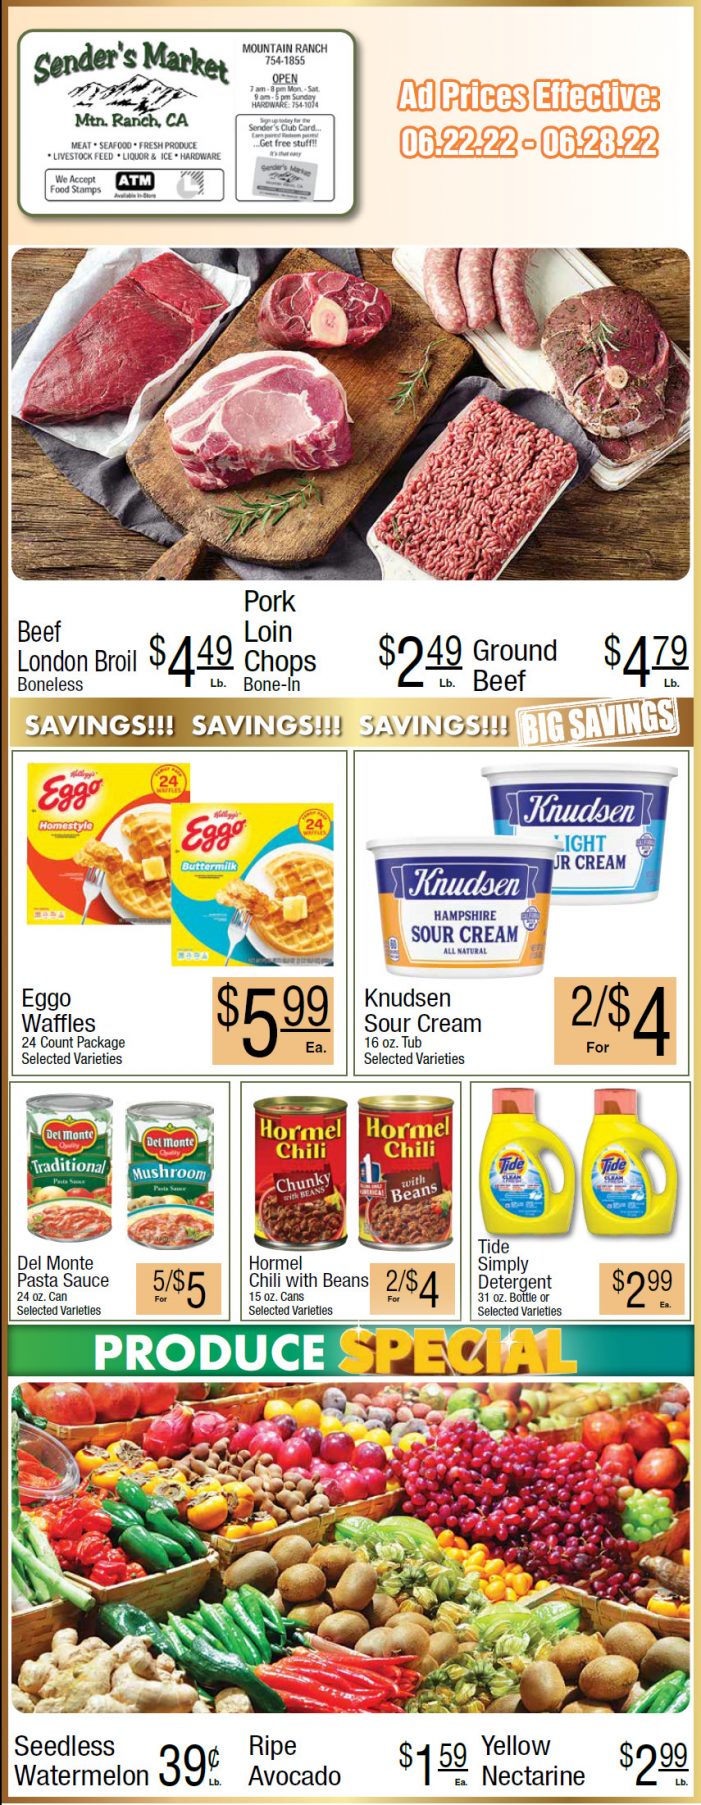 Sender’s Market Weekly Ad & Grocery Specials June 28!  Shop Local & Save!